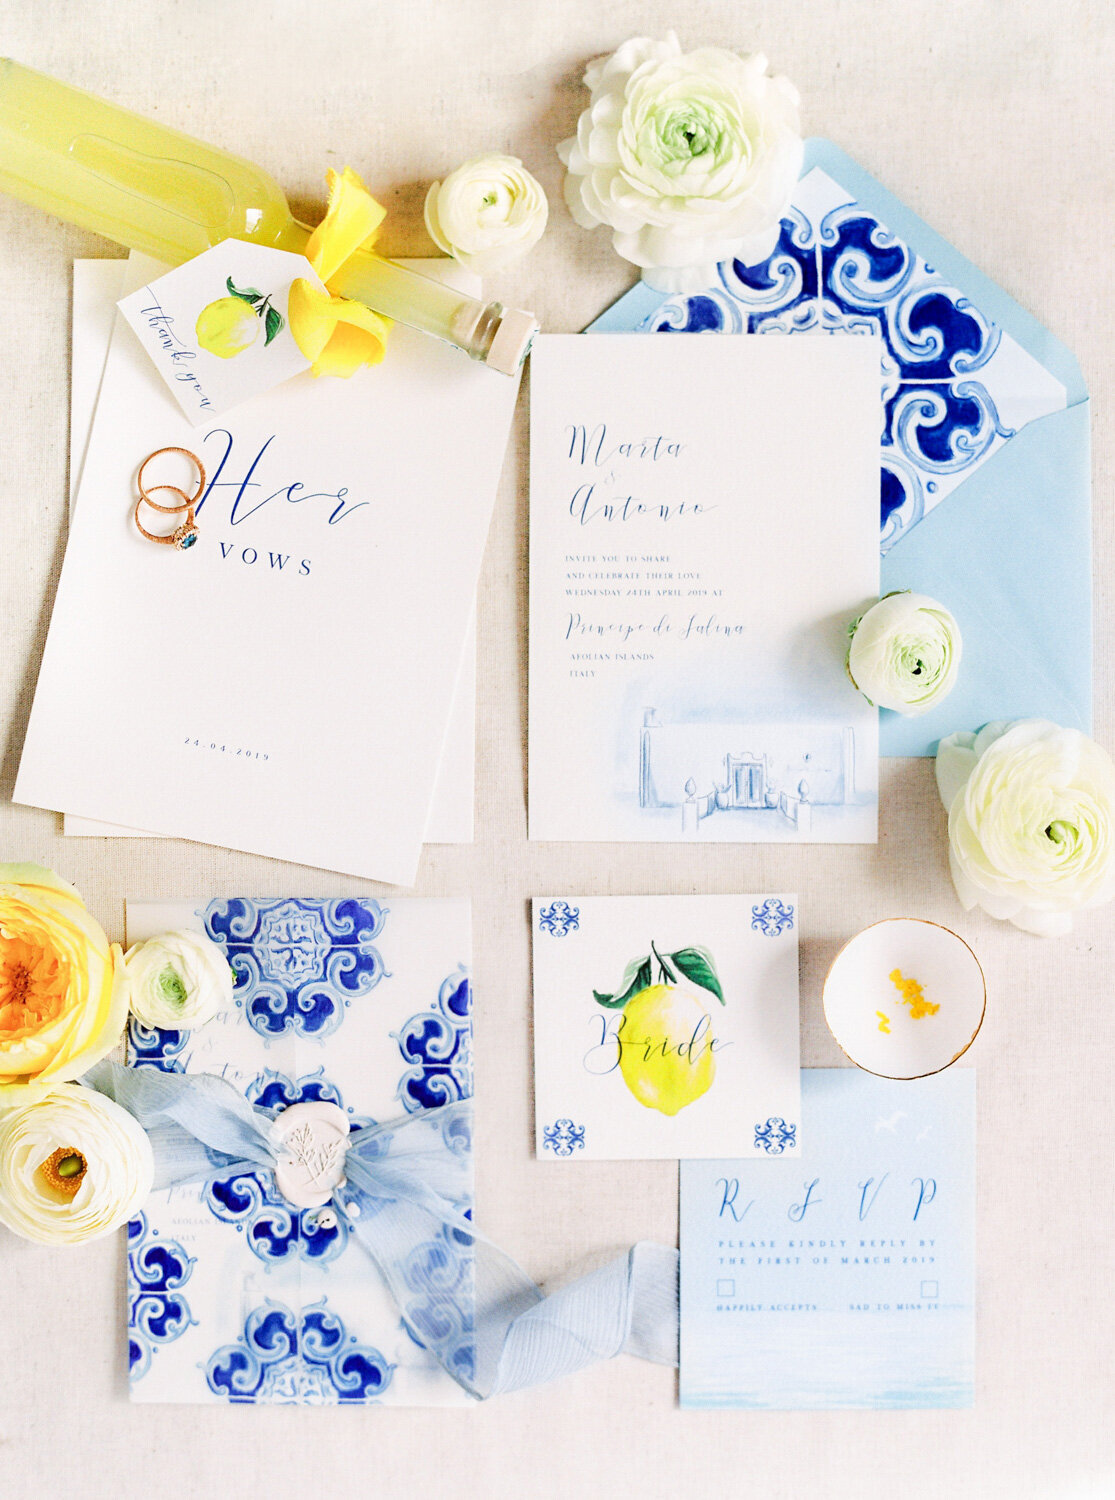 Sicily inspired stationery by Auca Design